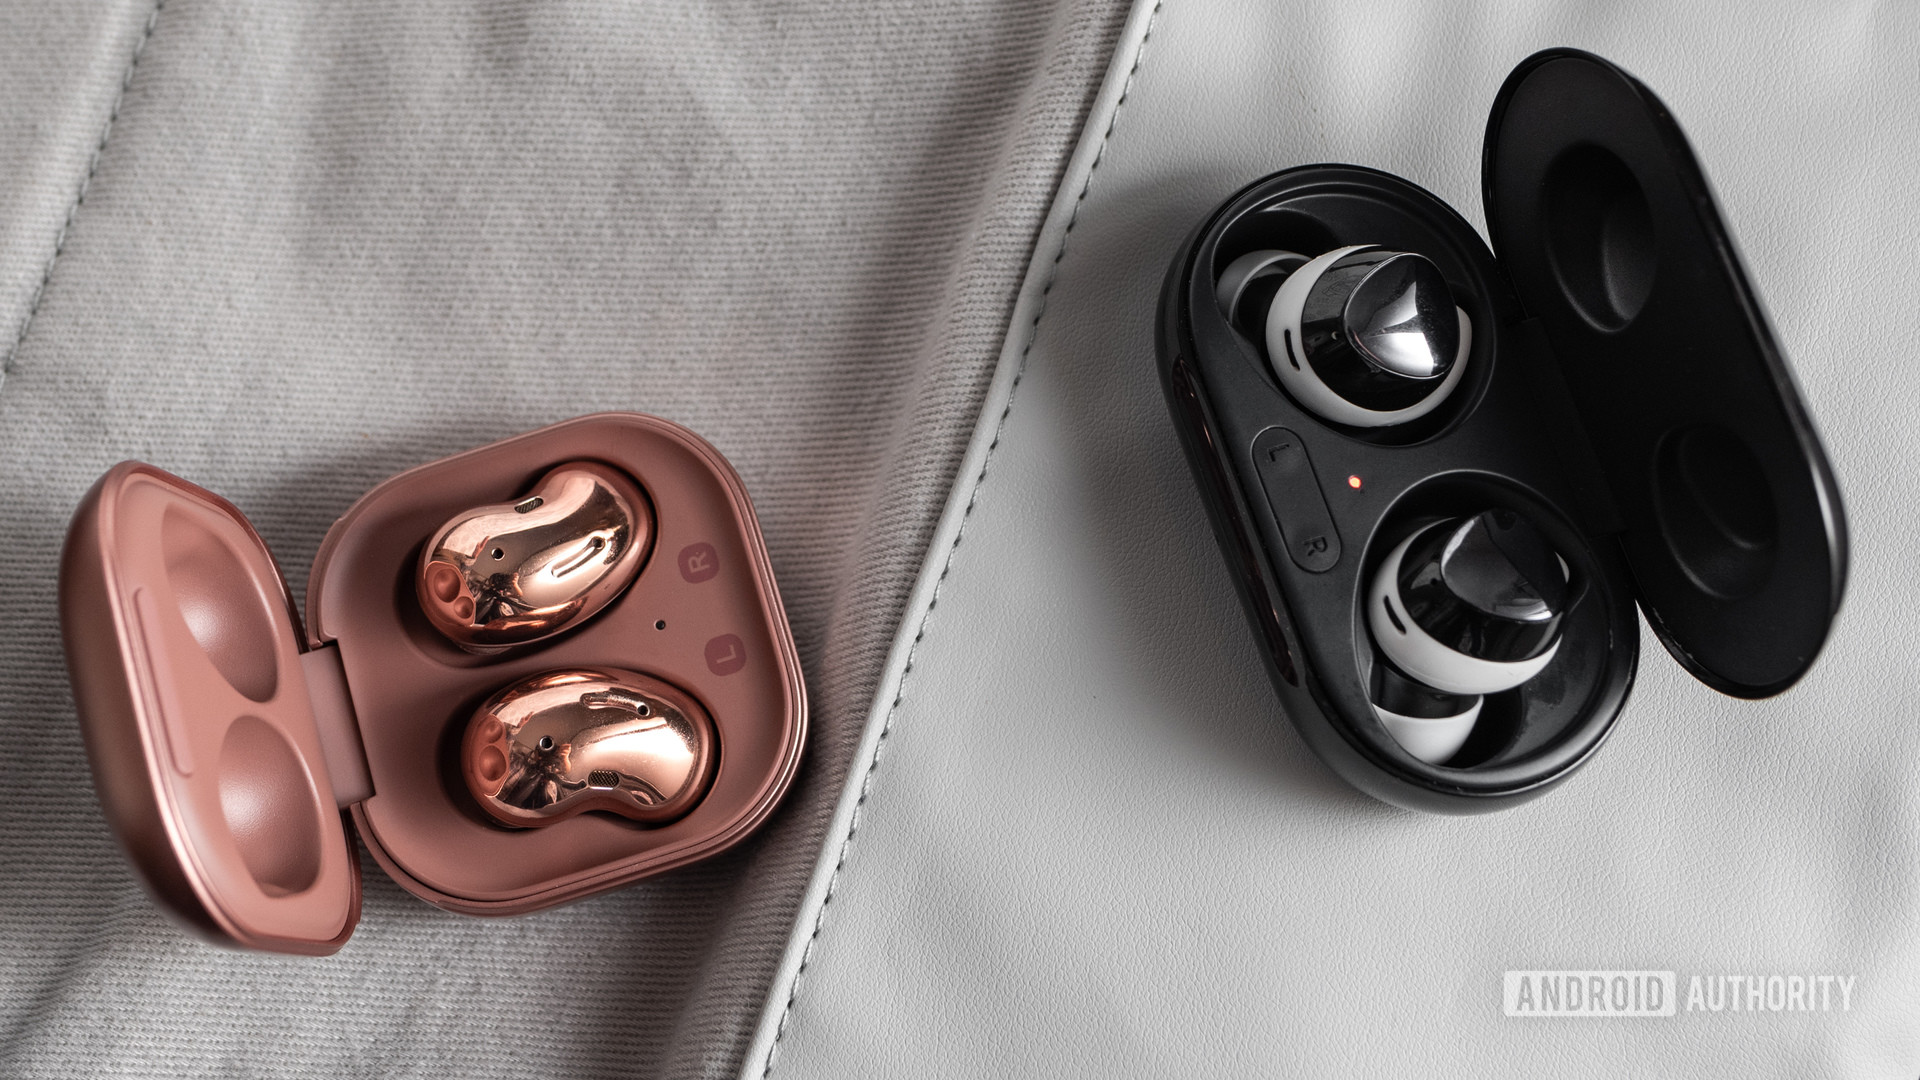 A picture of the Samsung Galaxy Buds Live noise cancelling true wireless earbuds in the open case next to the Samsung Galaxy Buds Plus.